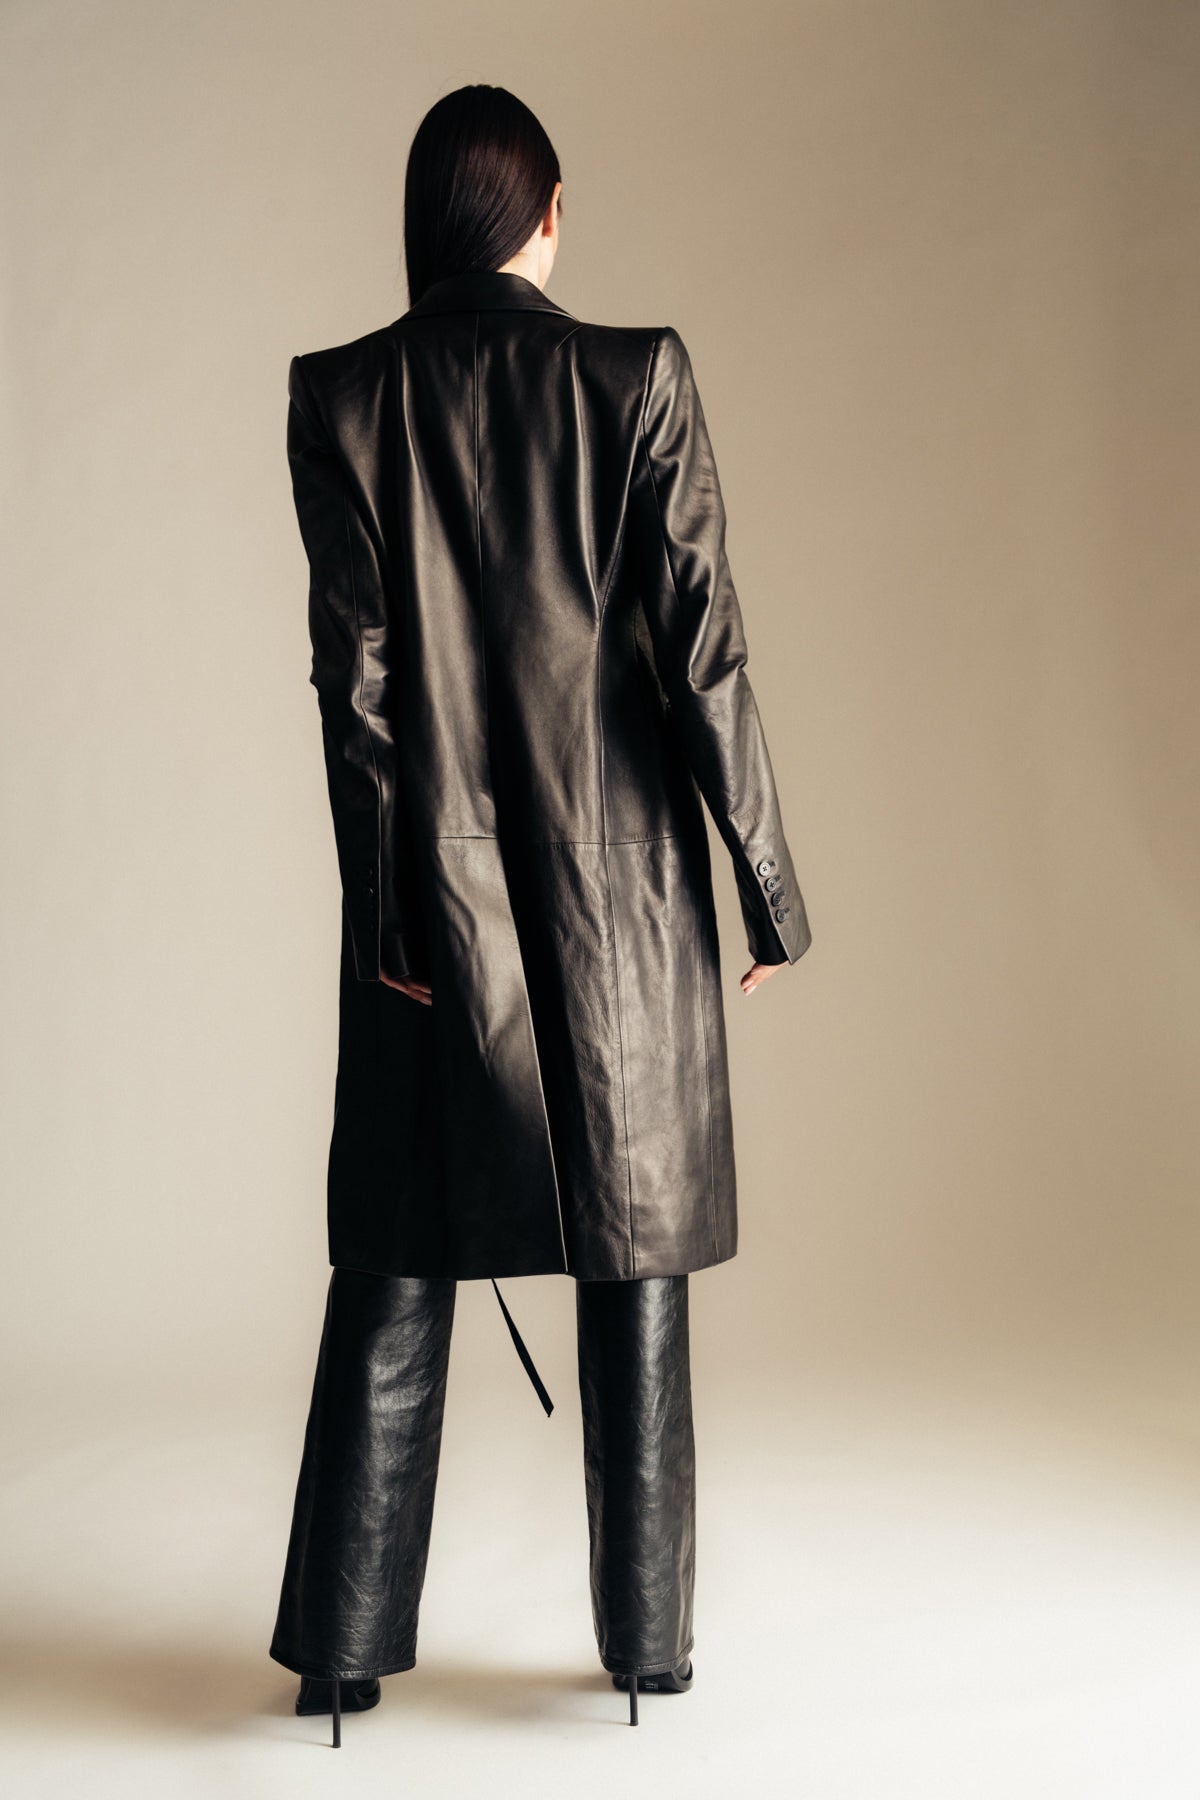 ANN DEMEULEMEESTER | NOMIE FITTED TAILORED COAT